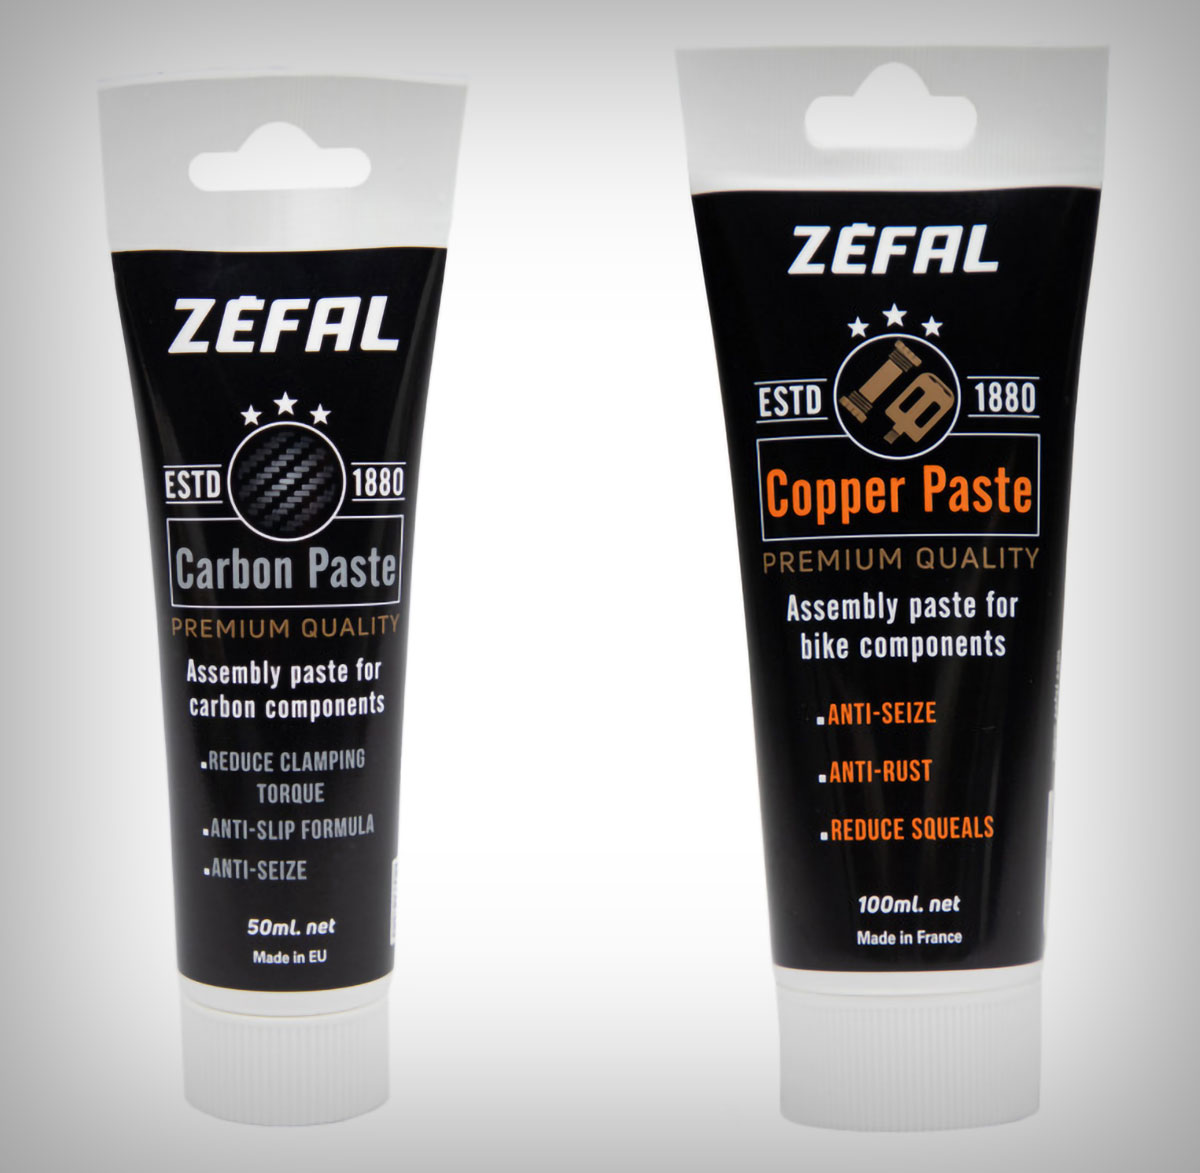 Zéfal presents two mounting pastes specifically designed for carbon components and metal parts